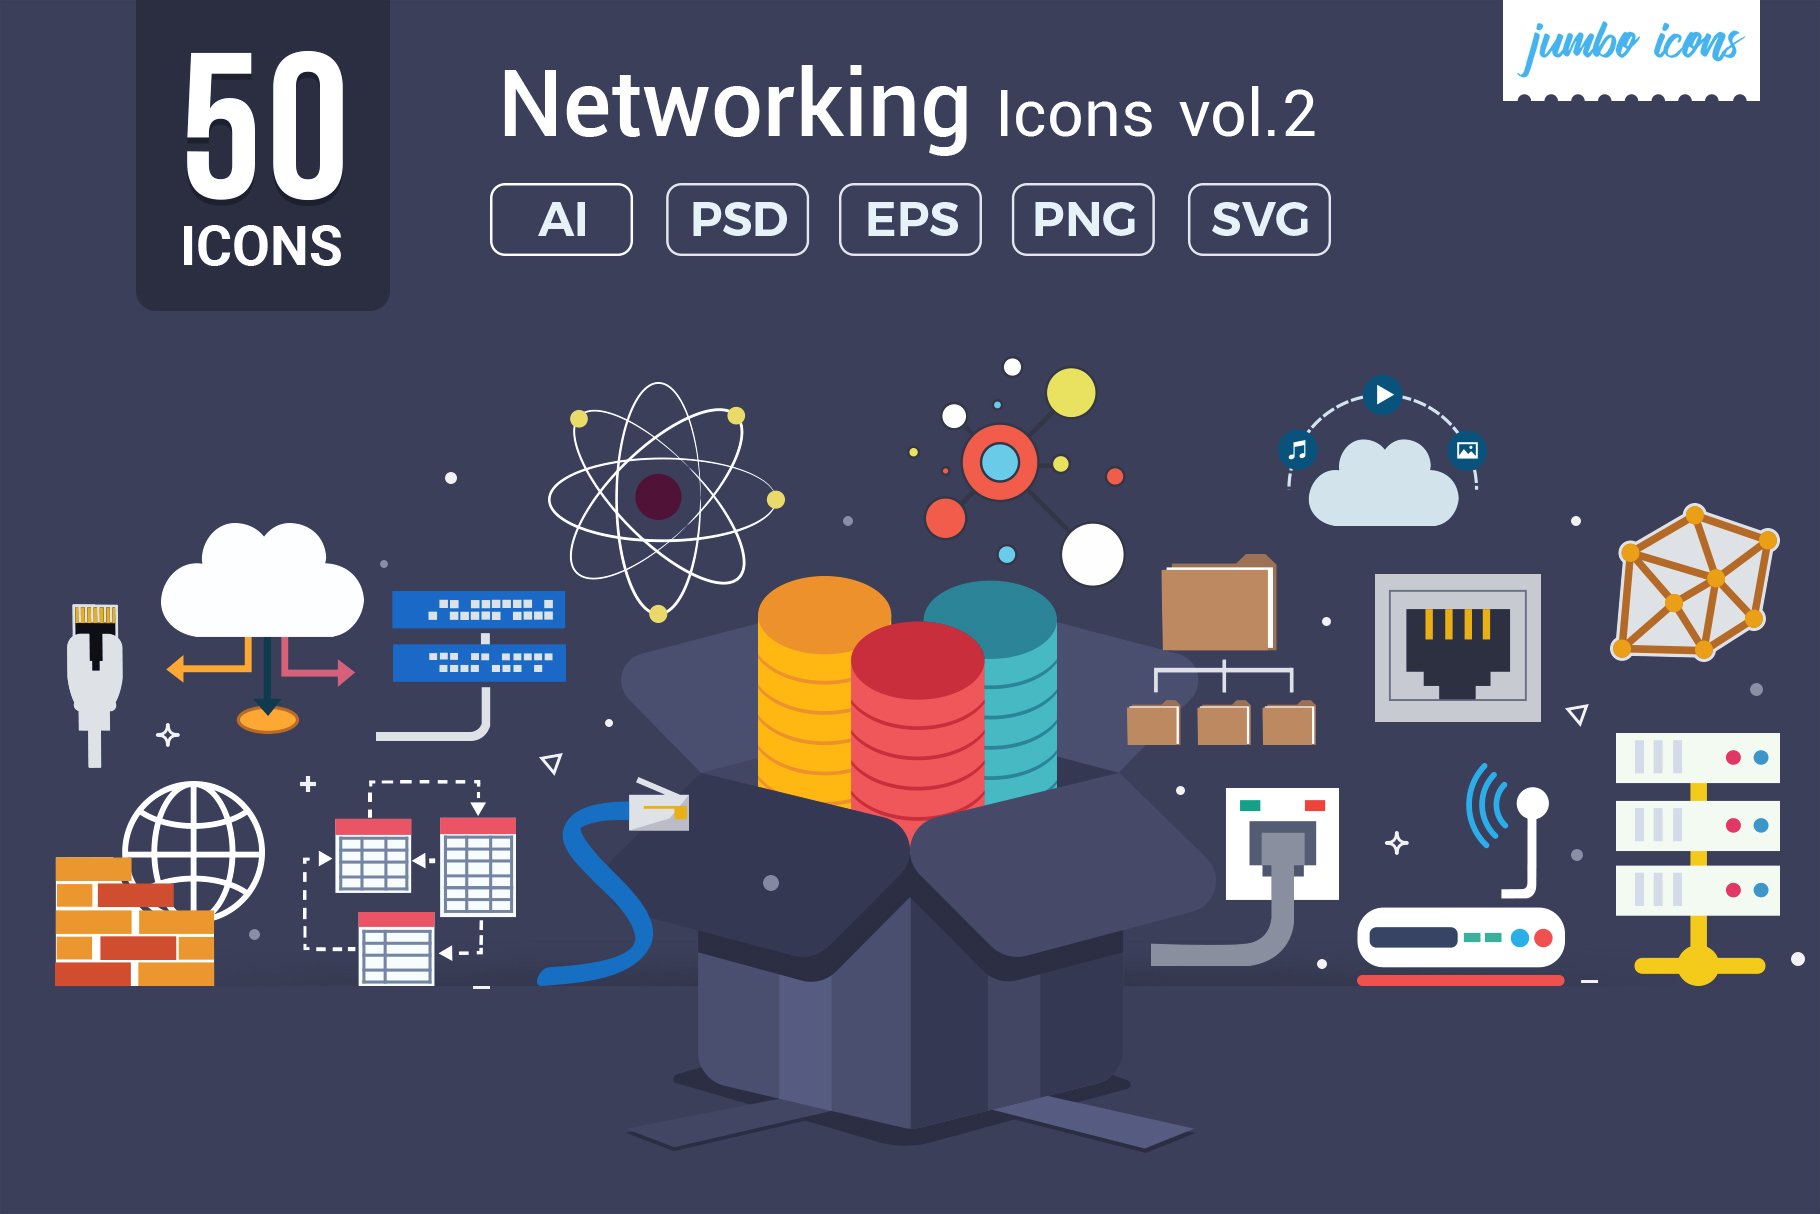 Flat Vector Icons Networking Pack V2 cover image.